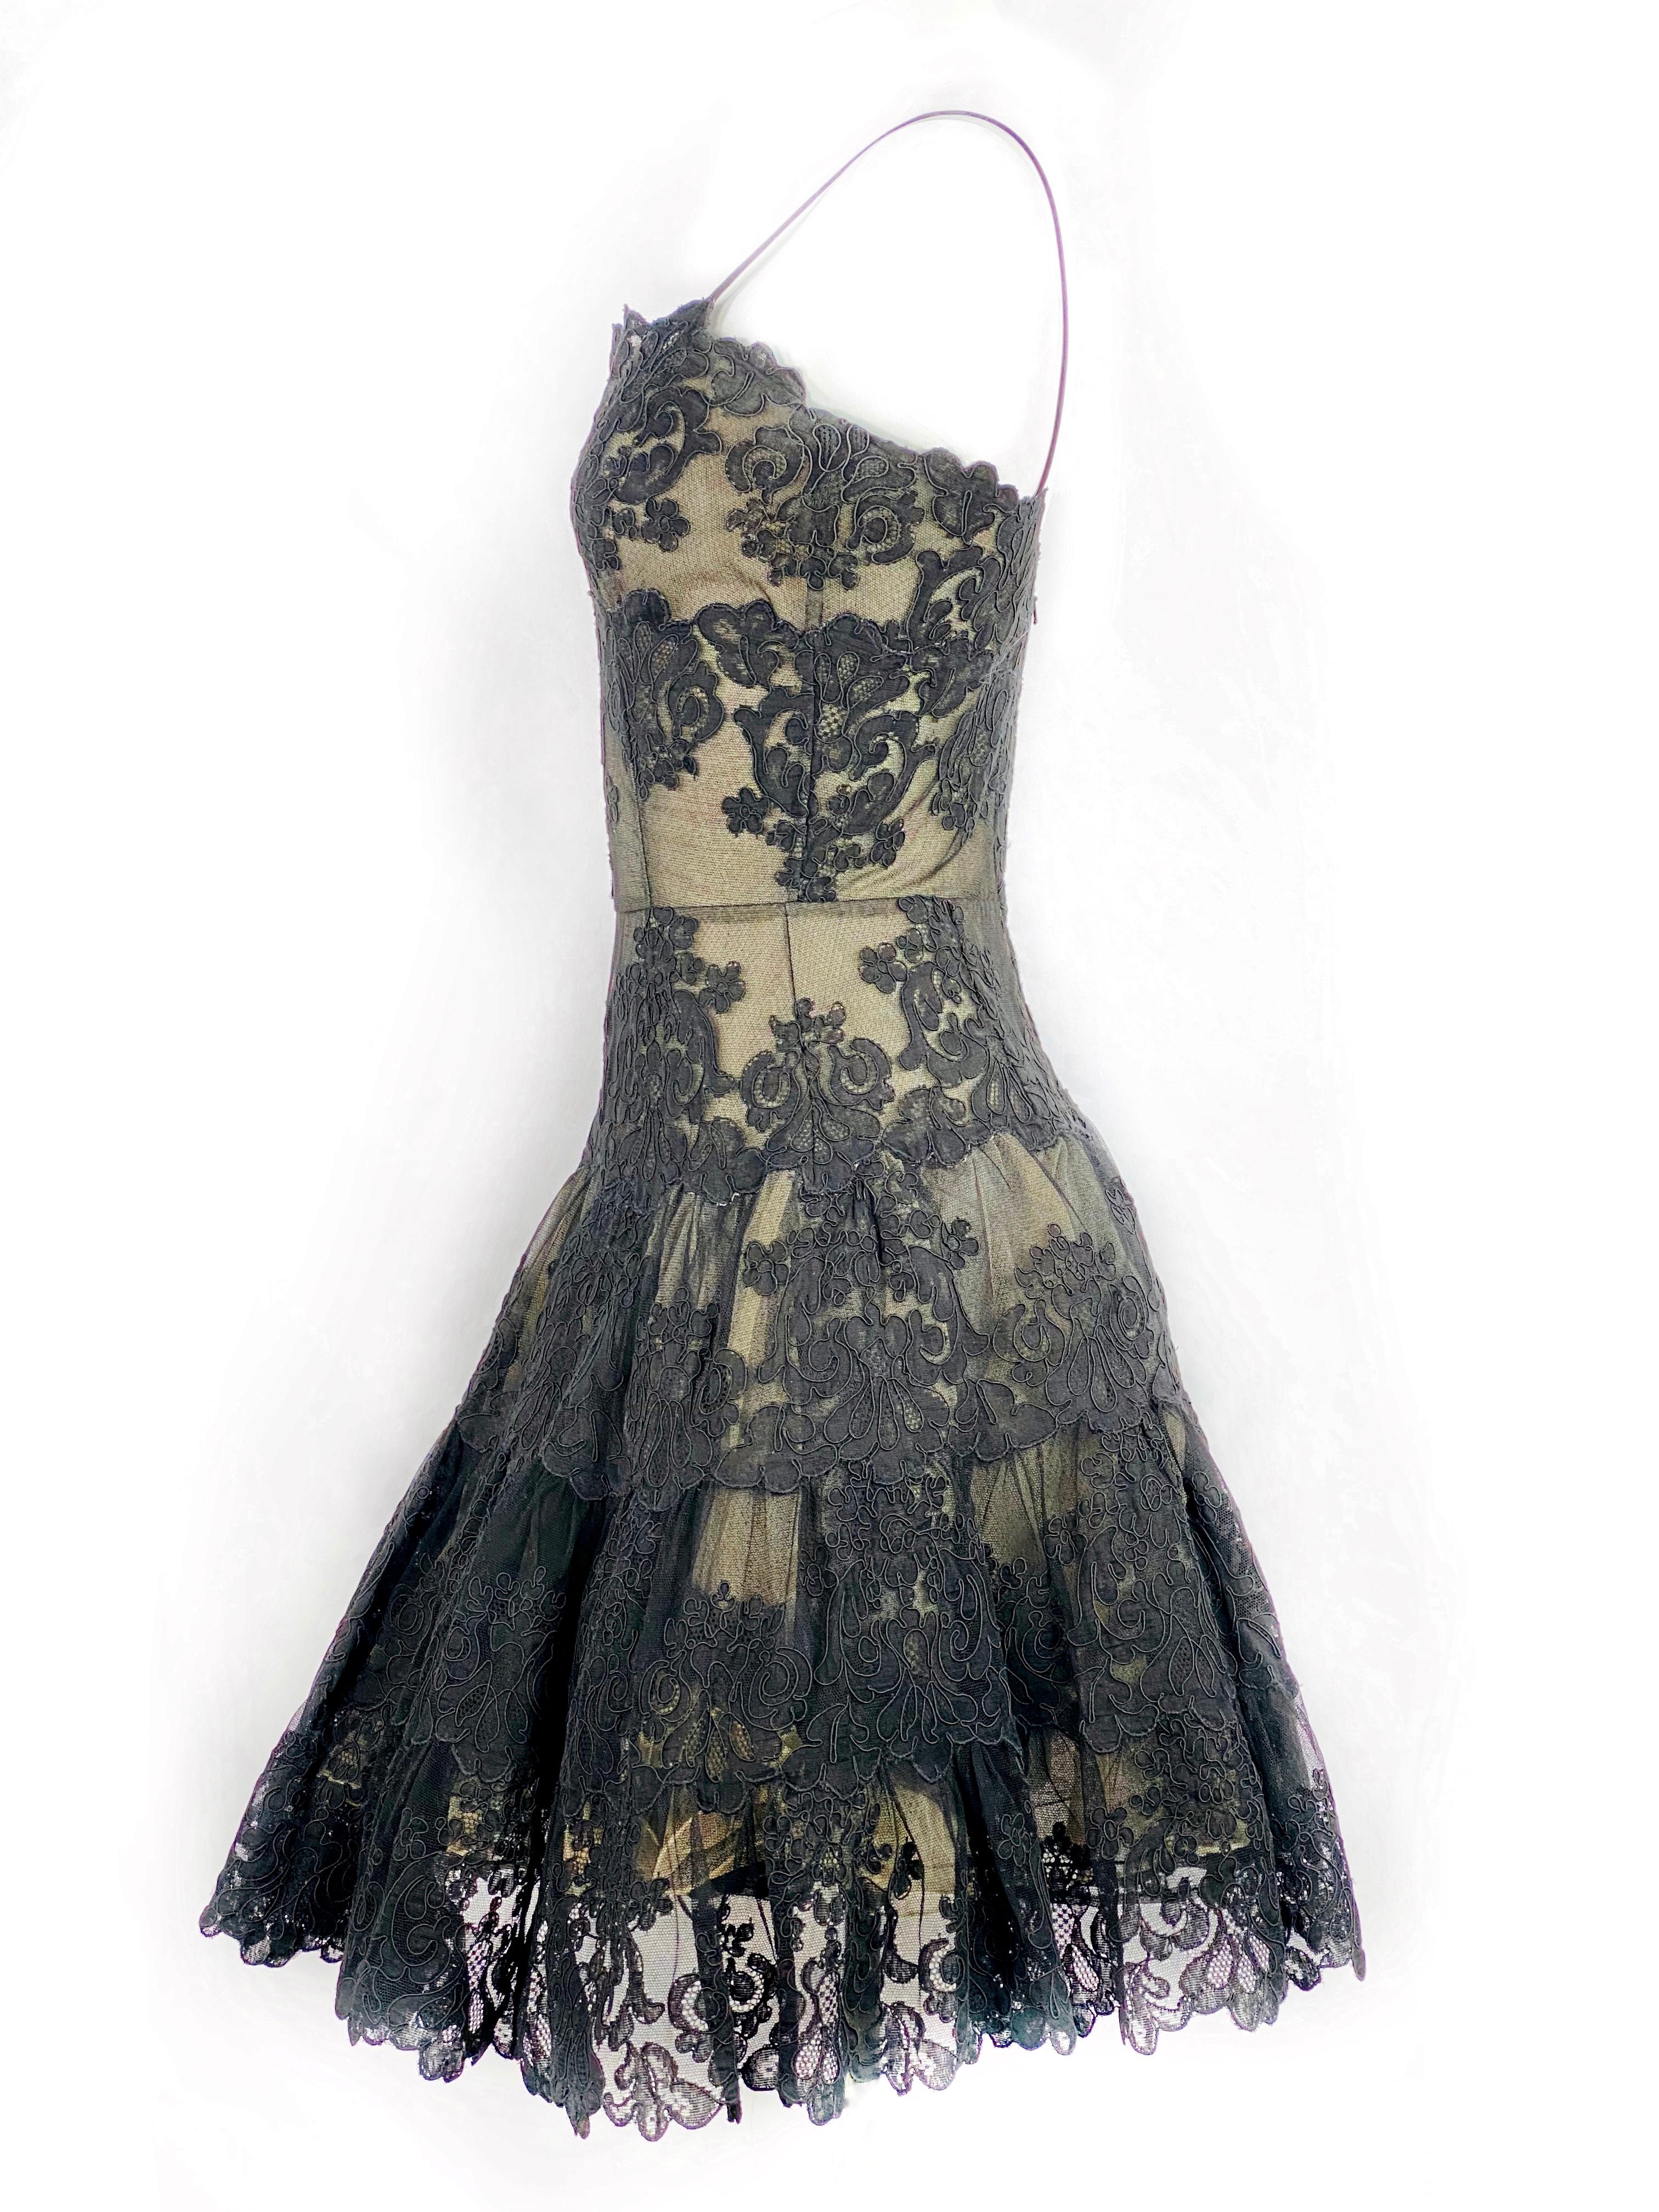 Vintage VICKY TIEL Couture Paris Black Floral Lace Sleeveless Mini Dress Size S In Excellent Condition For Sale In Beverly Hills, CA